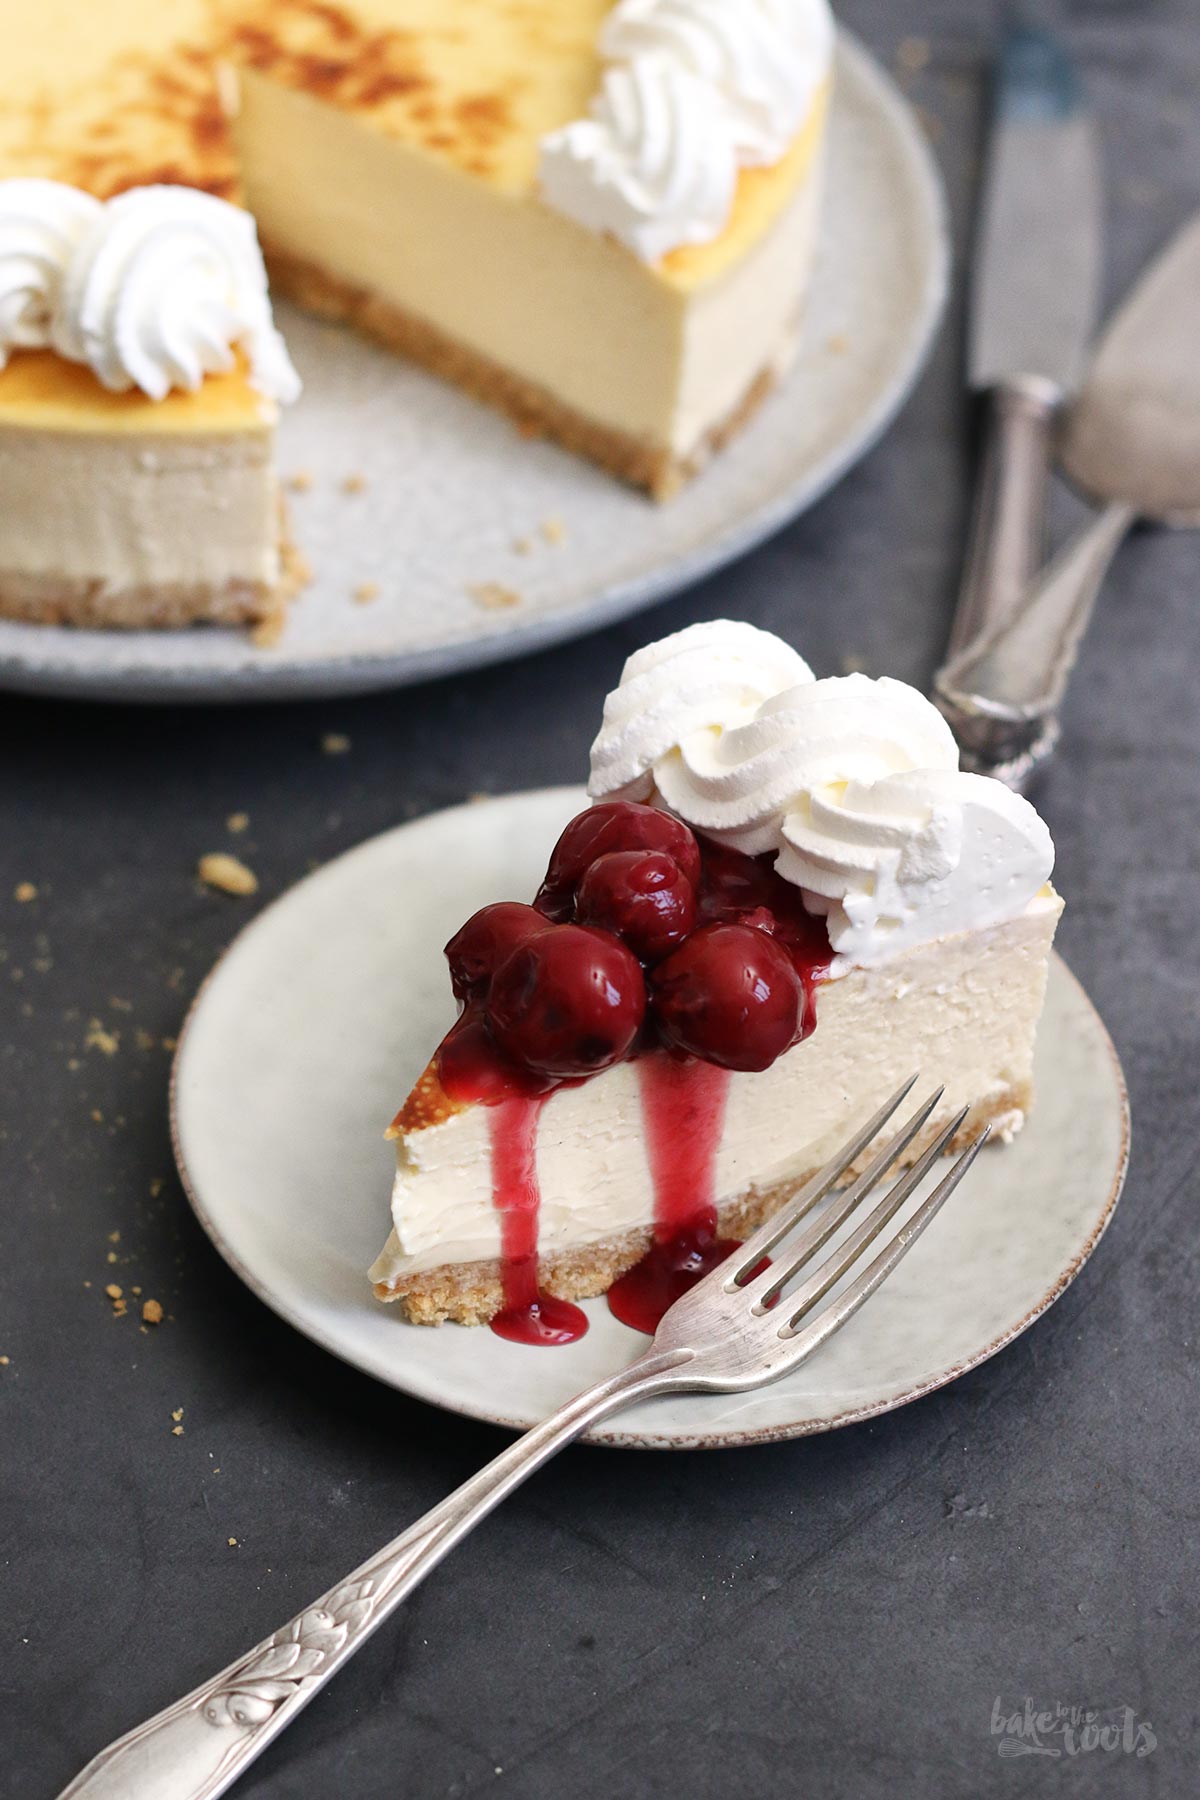 Creamiest Cheesecake with Cherry Compote (sugar-free) | Bake to the roots